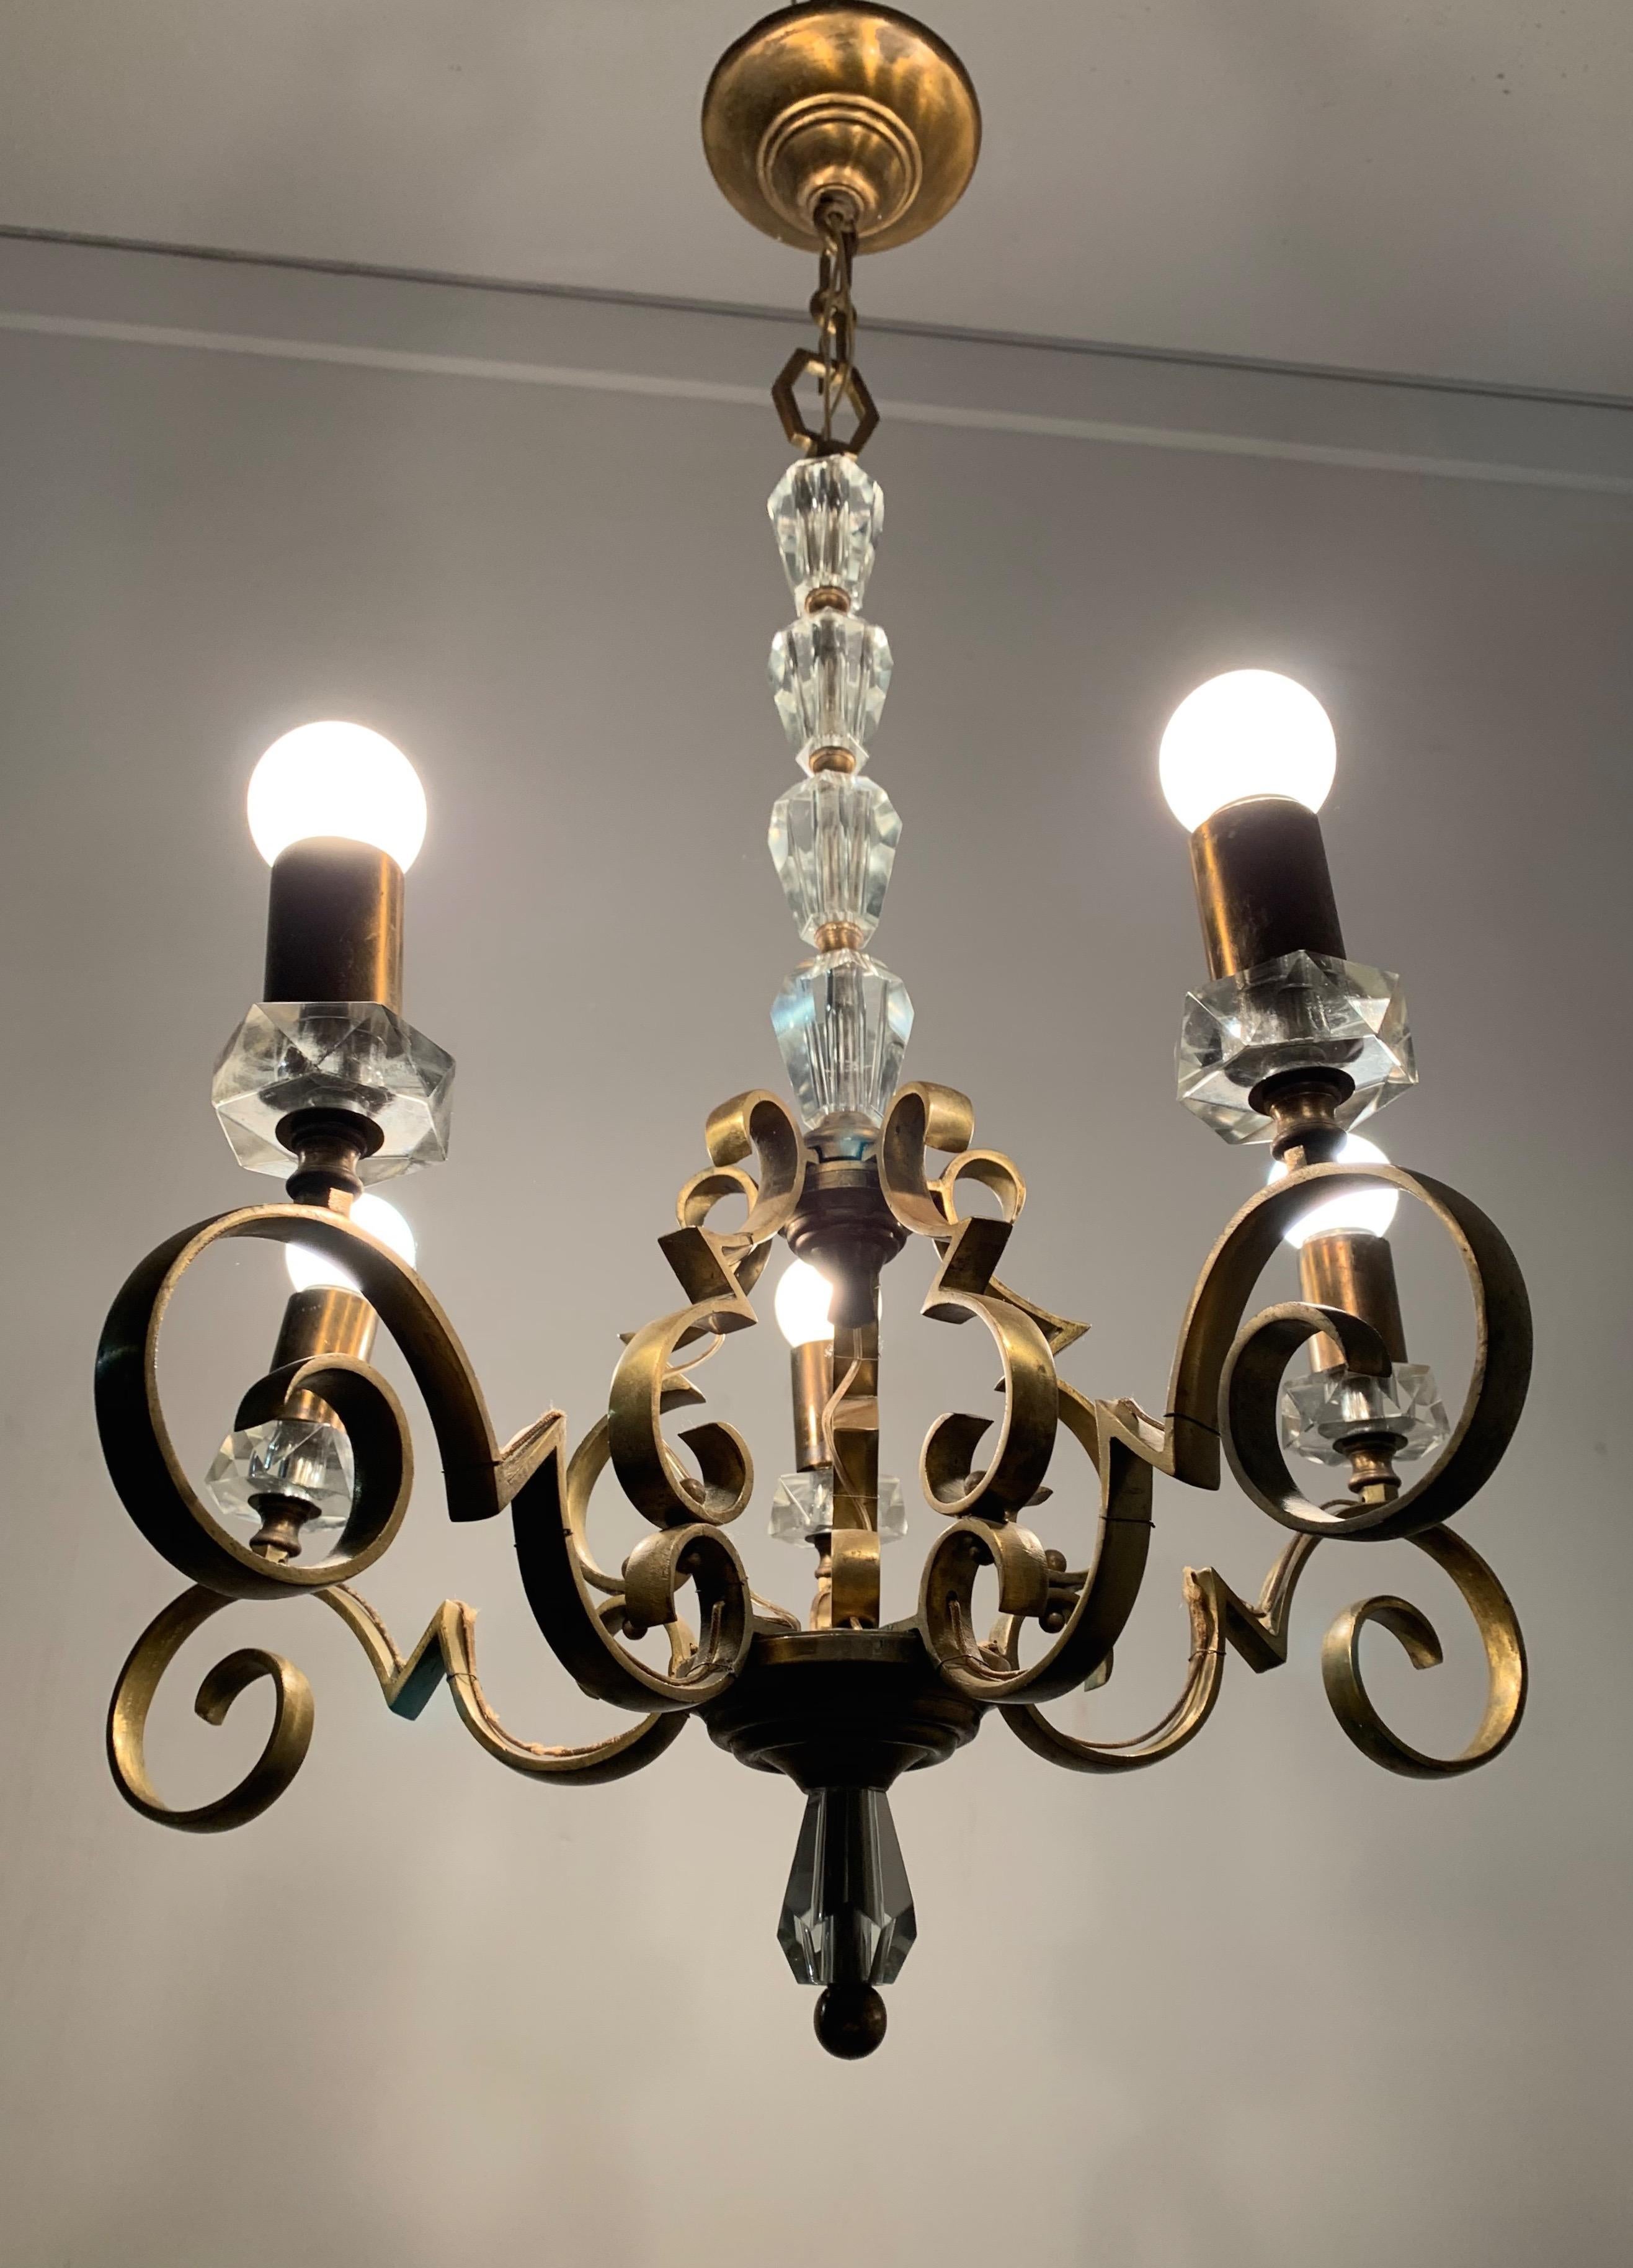 Very stylish and high quality French Art Deco pendant light.

This beautifully handcrafted fixture from the 1920s is another striking example showing that the French probably were the best designers and manufacturers when it comes to early 20th